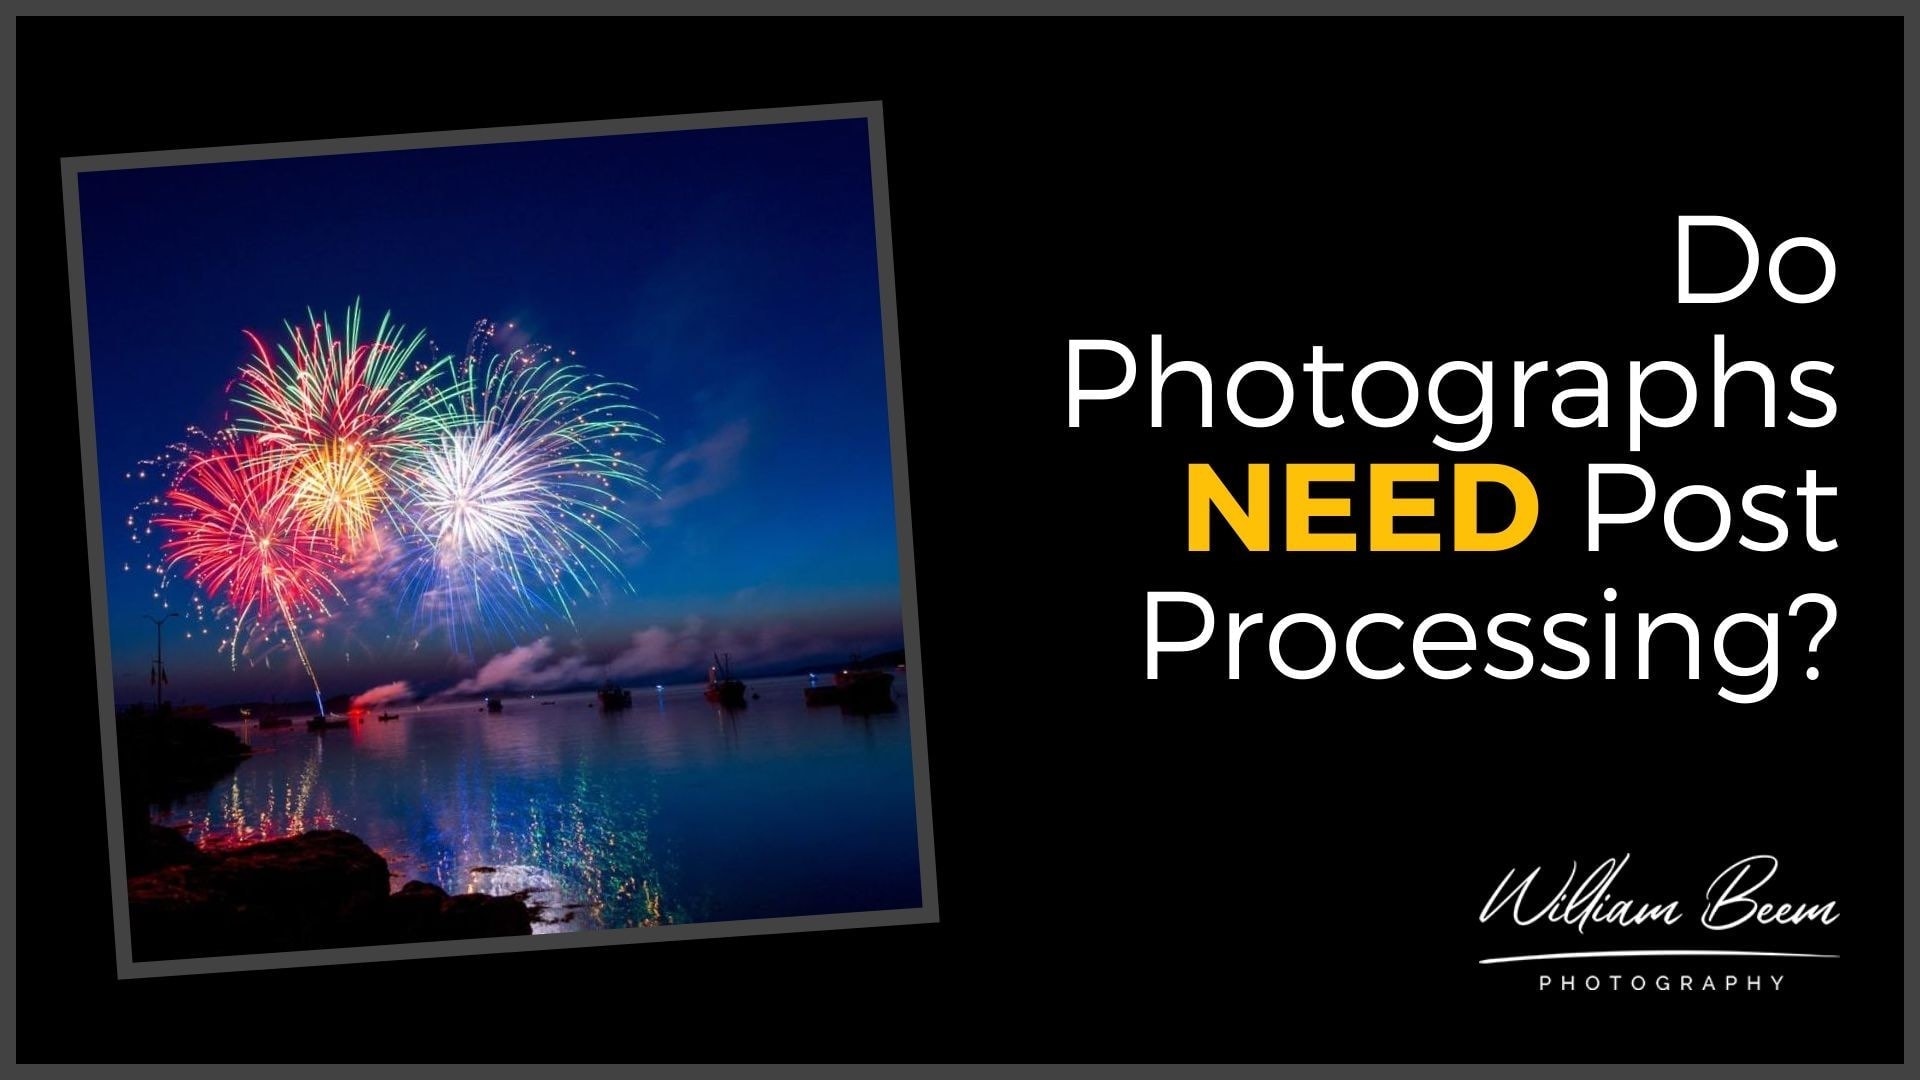 Do Photographs Need Post Processing